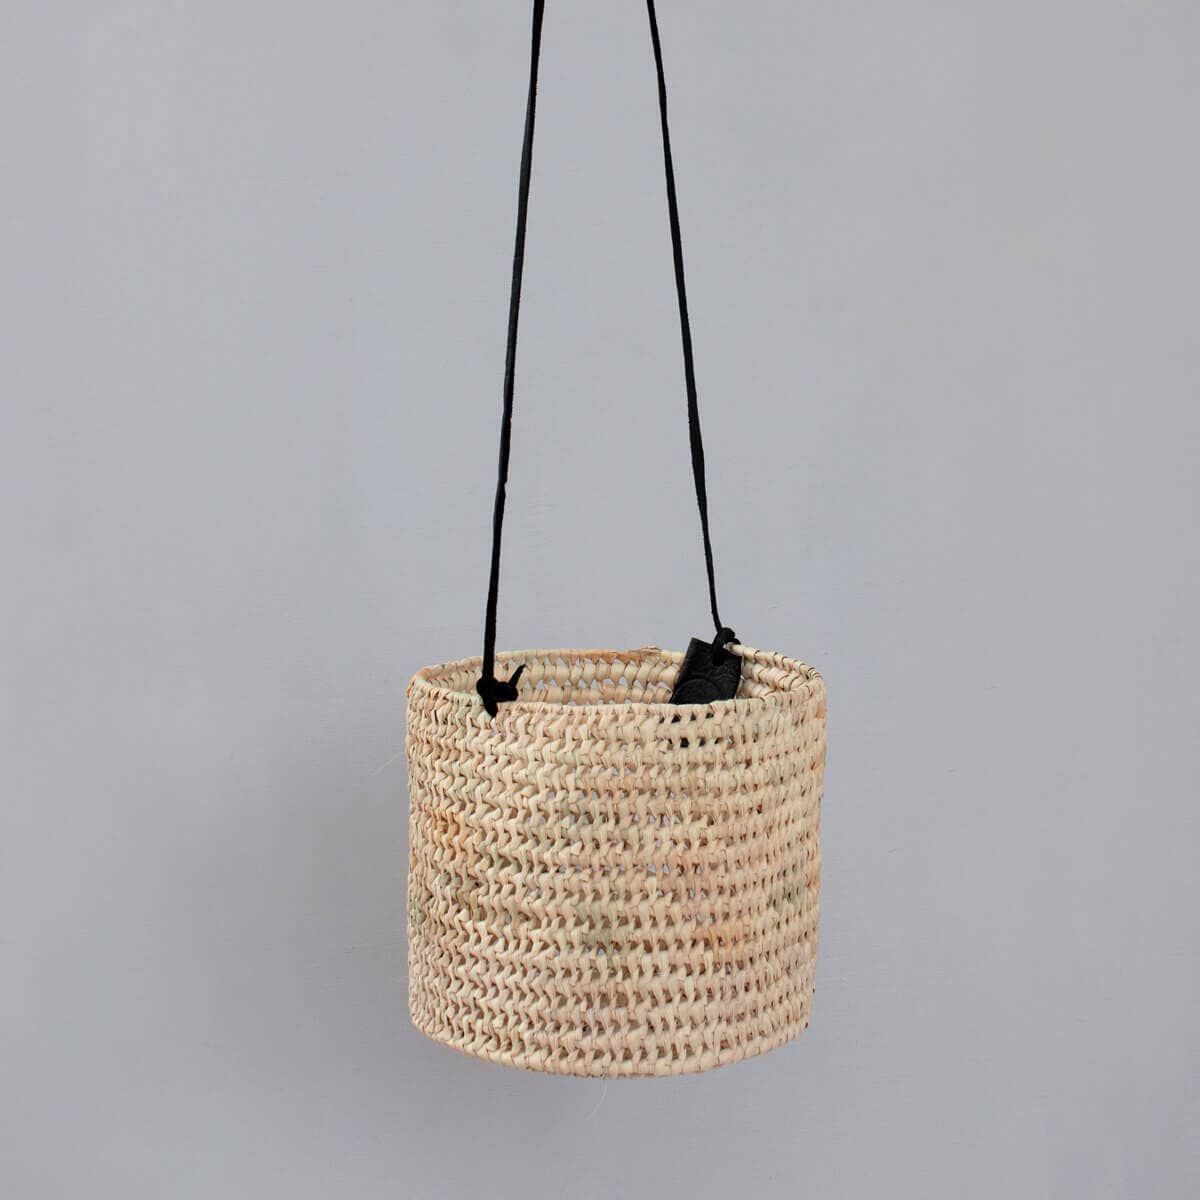 Open Weave Hanging Plant Baskets